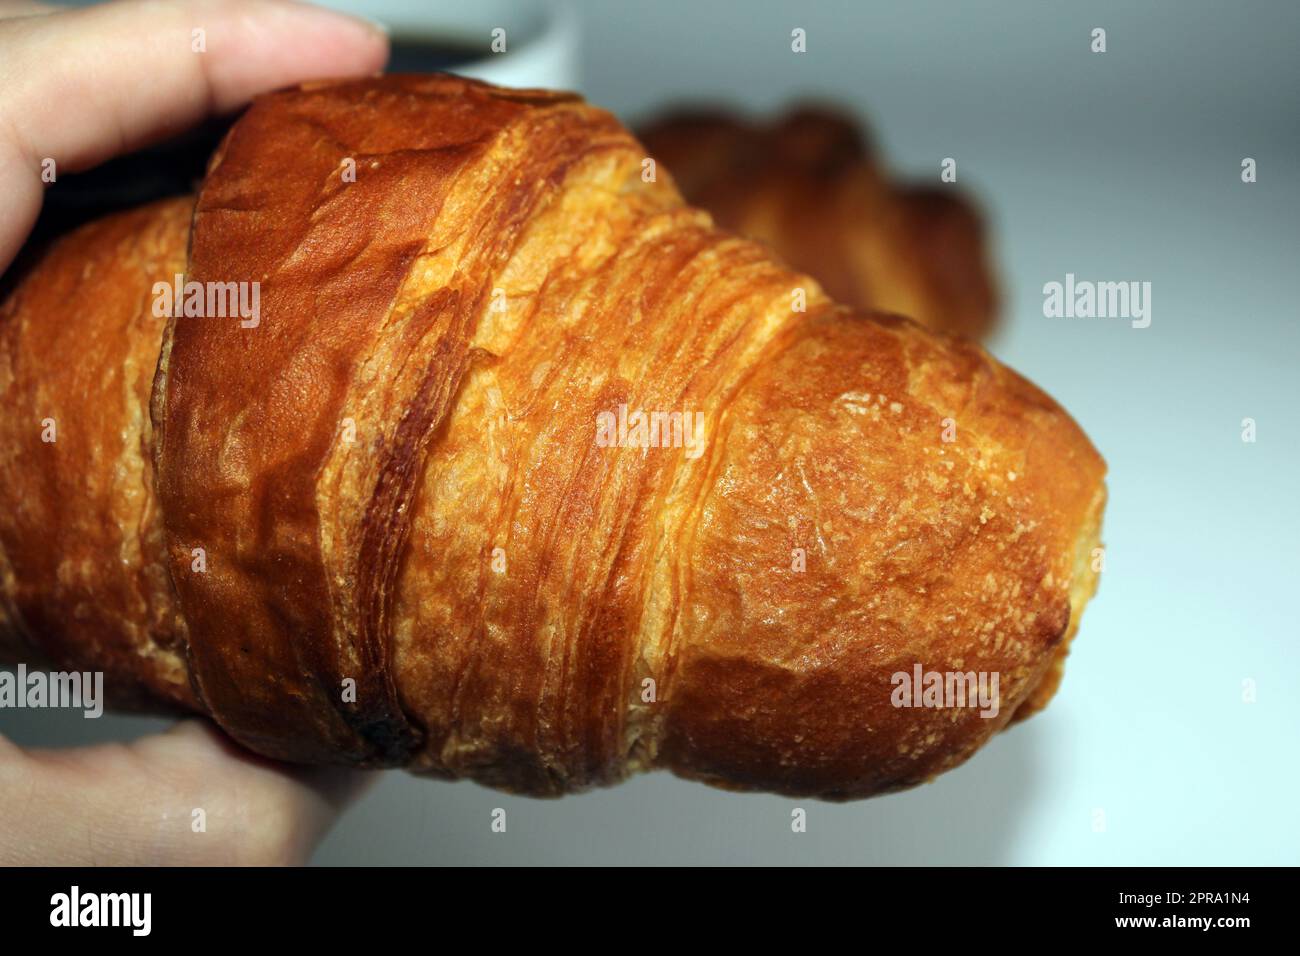 Fresh crispy croissant close-up in hand. Blurred light background. Cooking, home baking Stock Photo